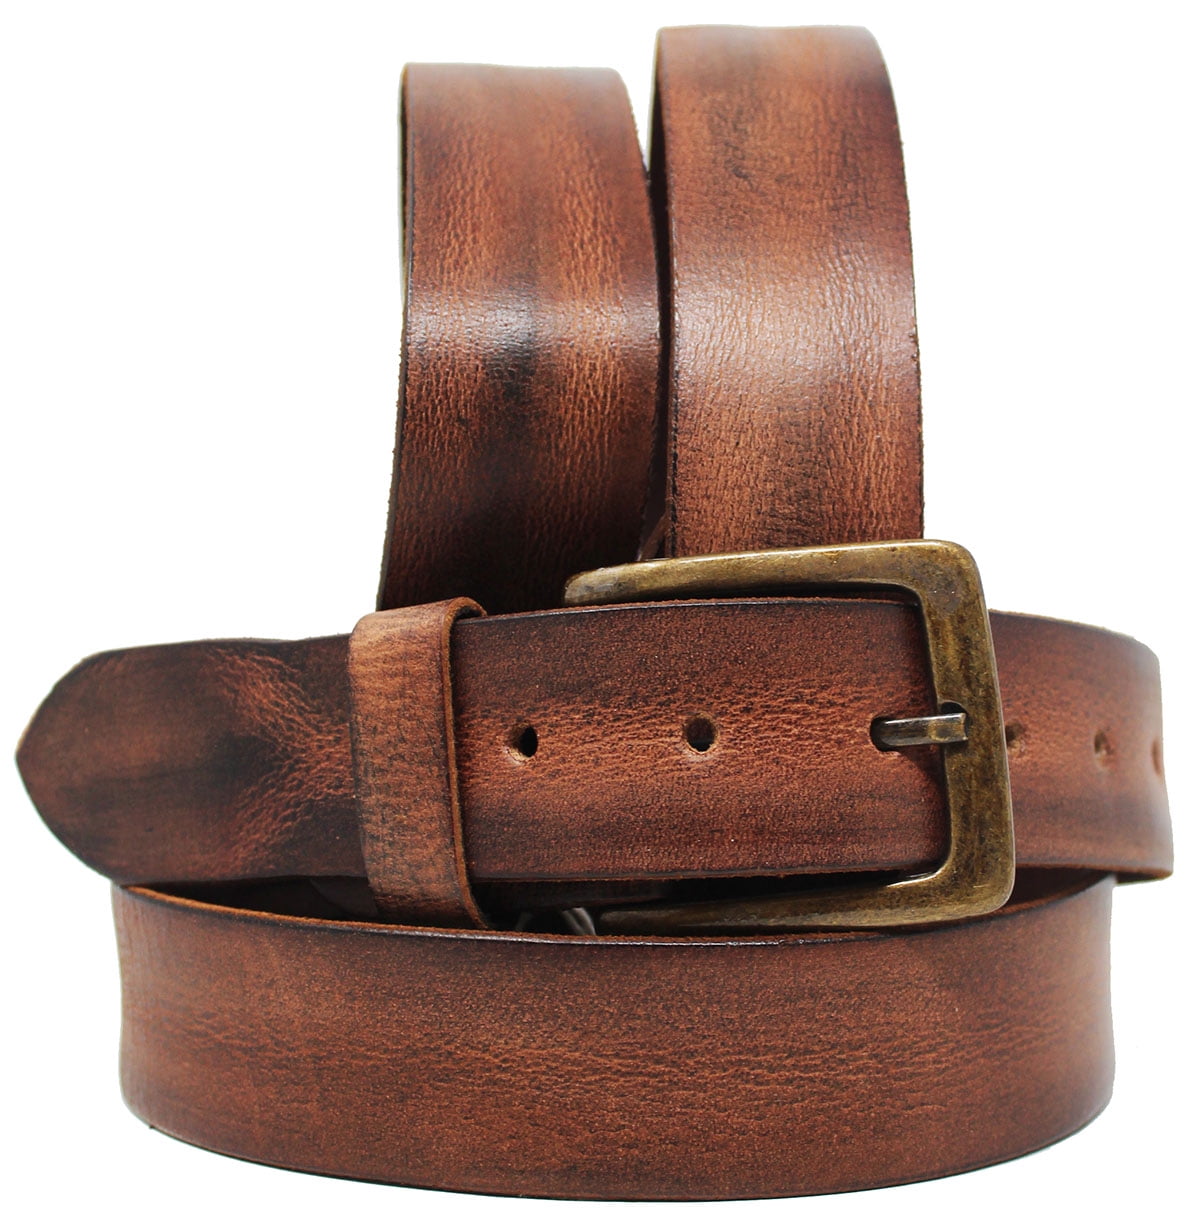 MENS LEATHER BELTS FULL GRAIN BROWN 100% GENUINE LEATHER HAND CRAFTED 1.5'' WIDE 